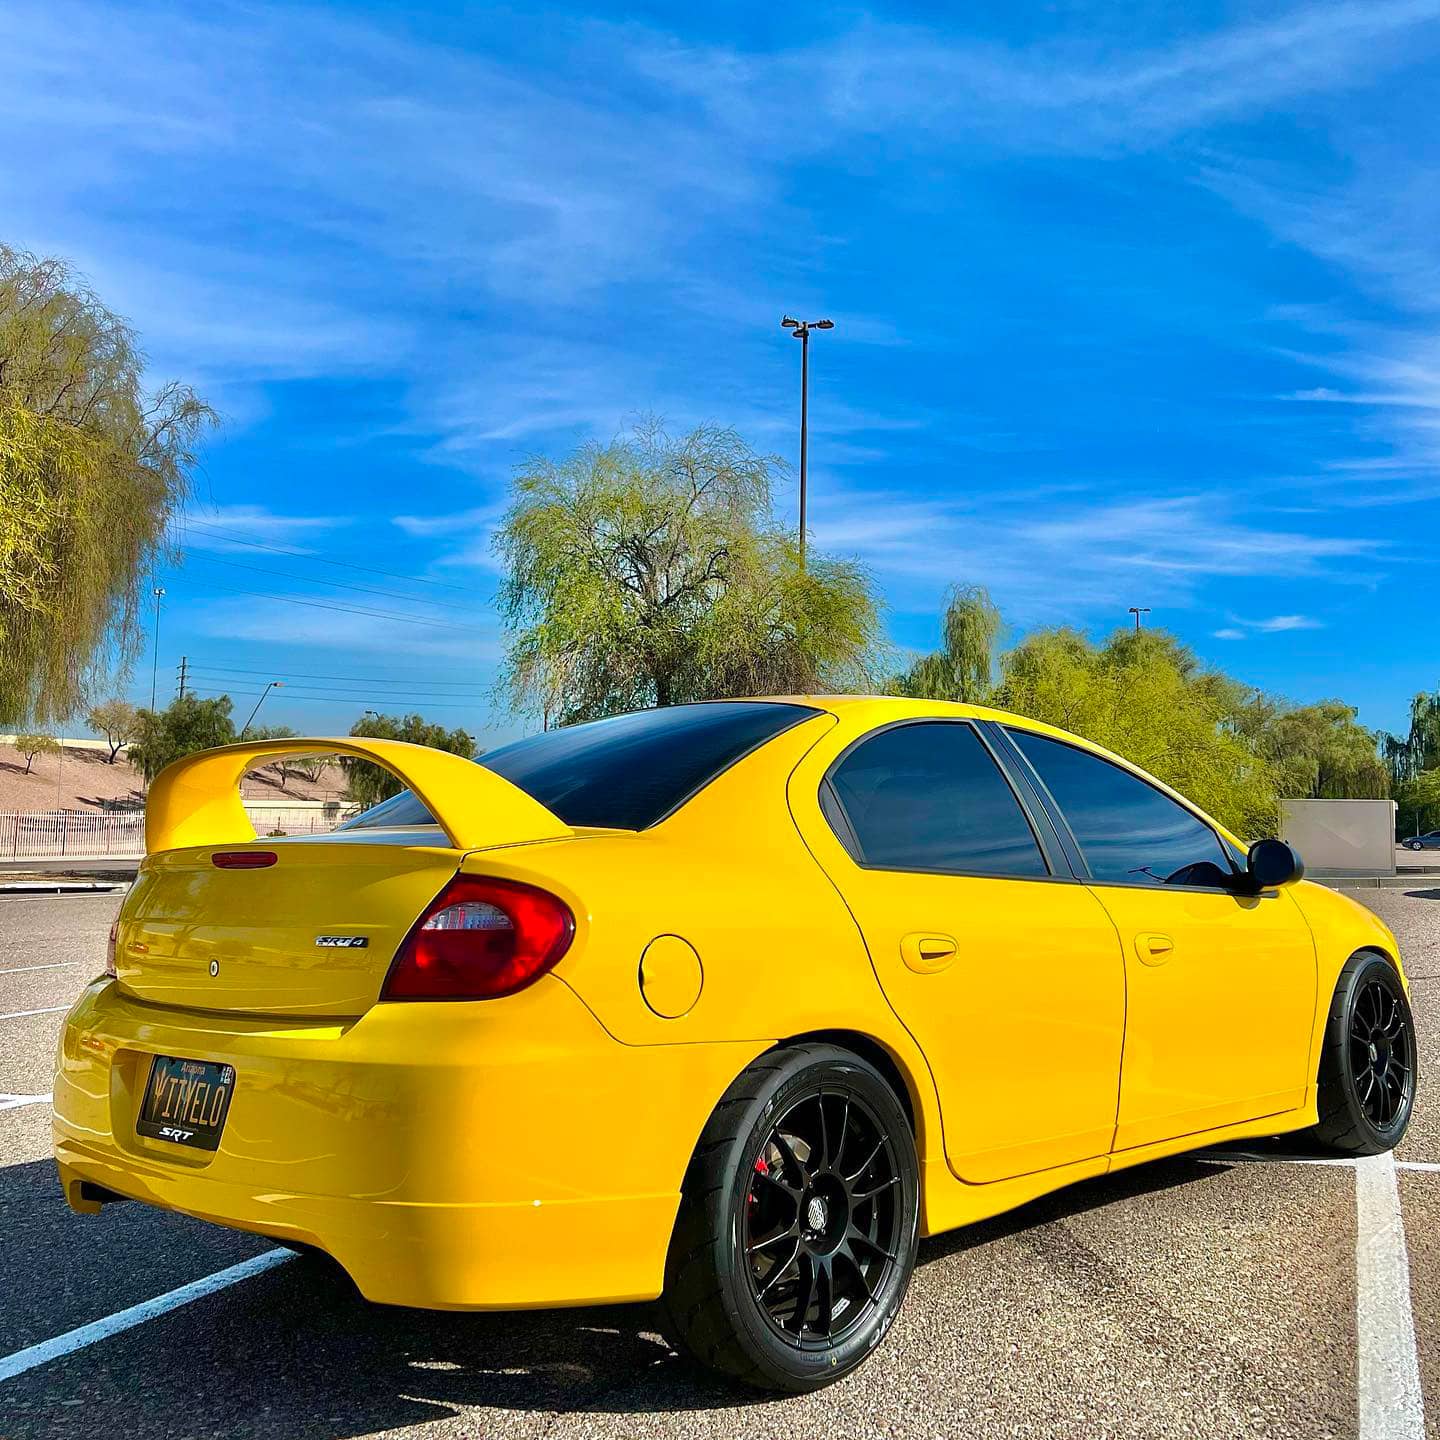 Lowered Dodge Neon SRT4 on KW v3 Coilovers with 340lb/in Front and 228lb/in Rear spring rates